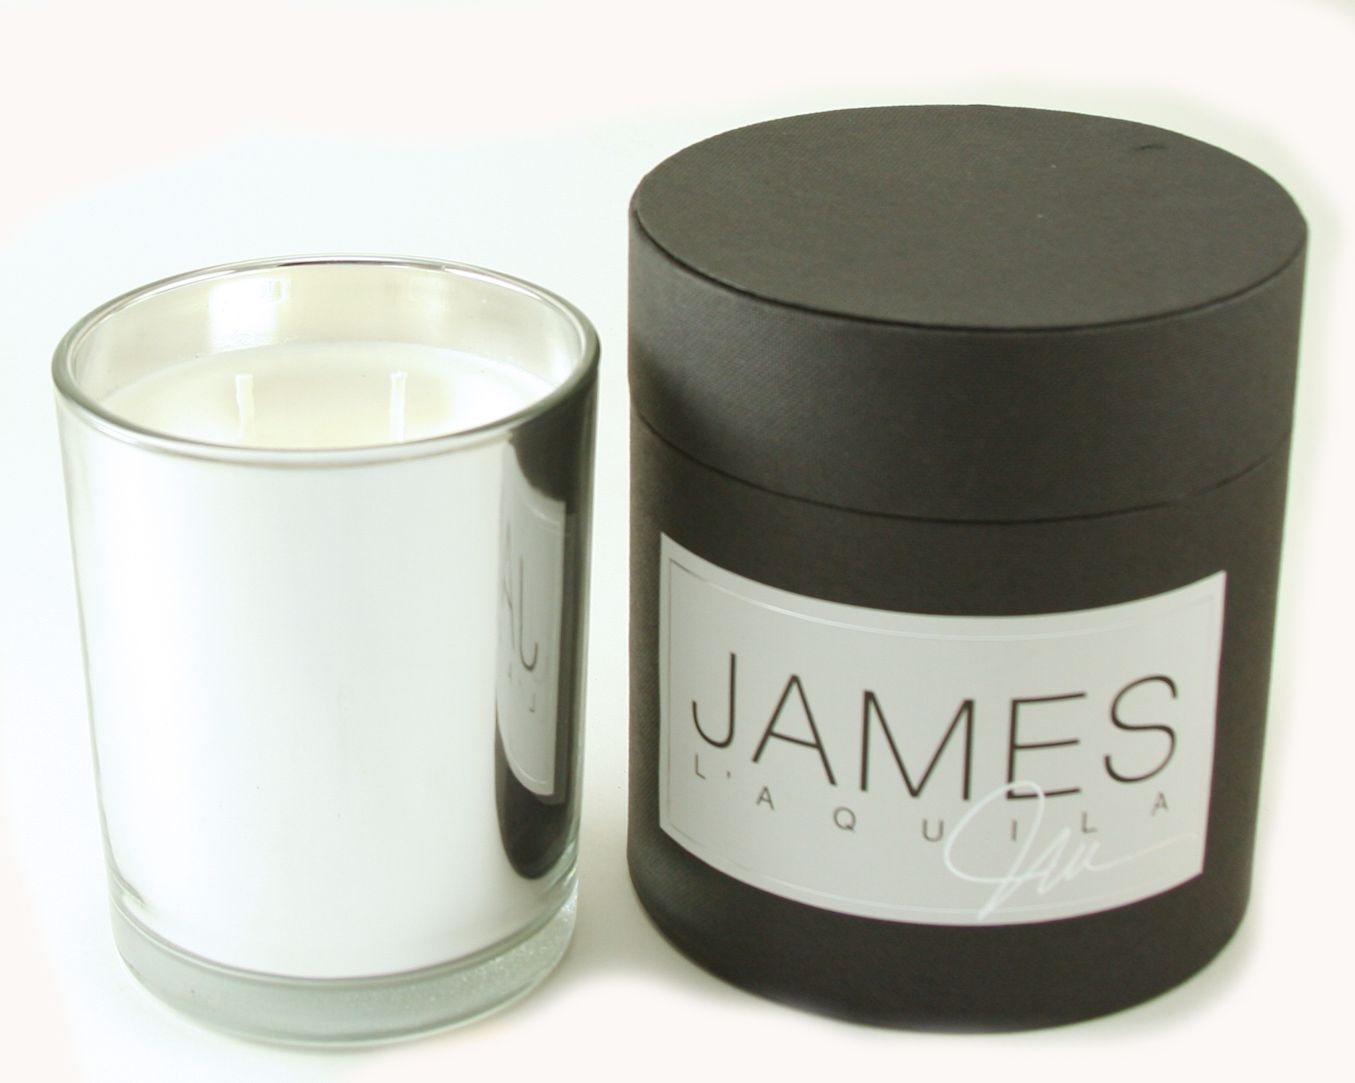 L AQUILA James by Jimmy Delaurentis Luxury 18 oz Scented Jar Candle